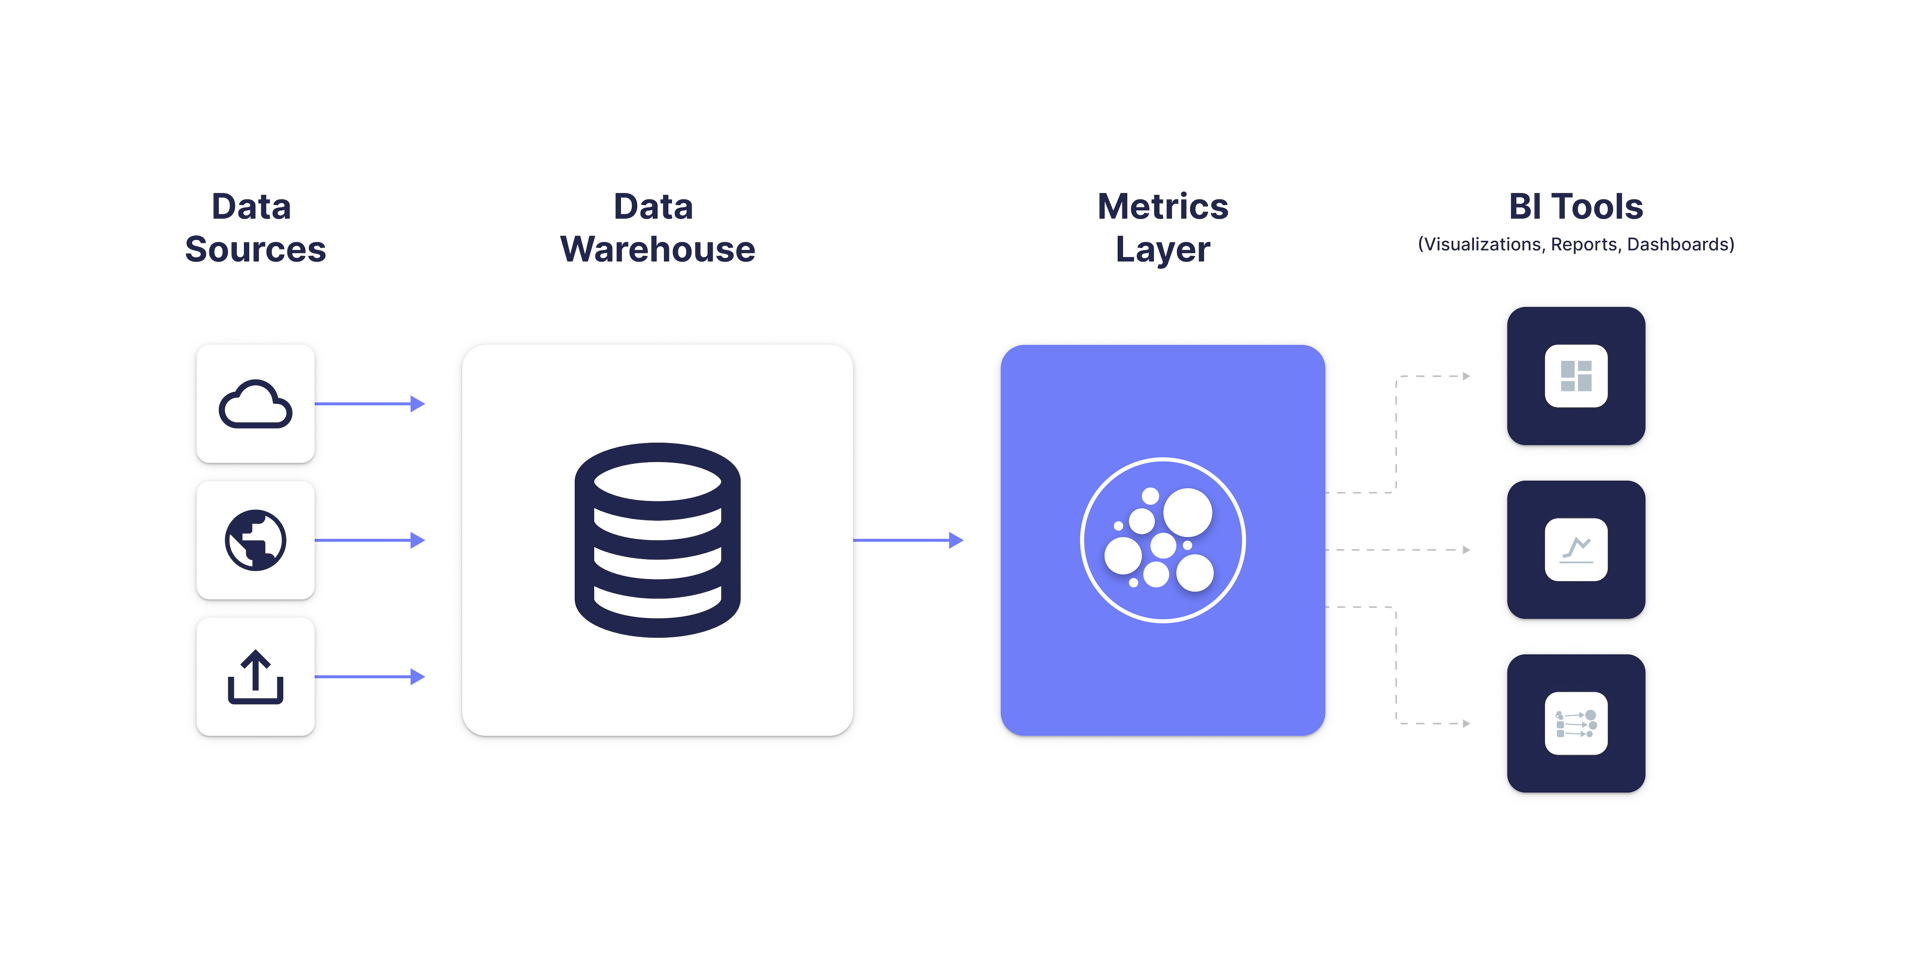 Metrics Layer as Part of the Modern Data Stack